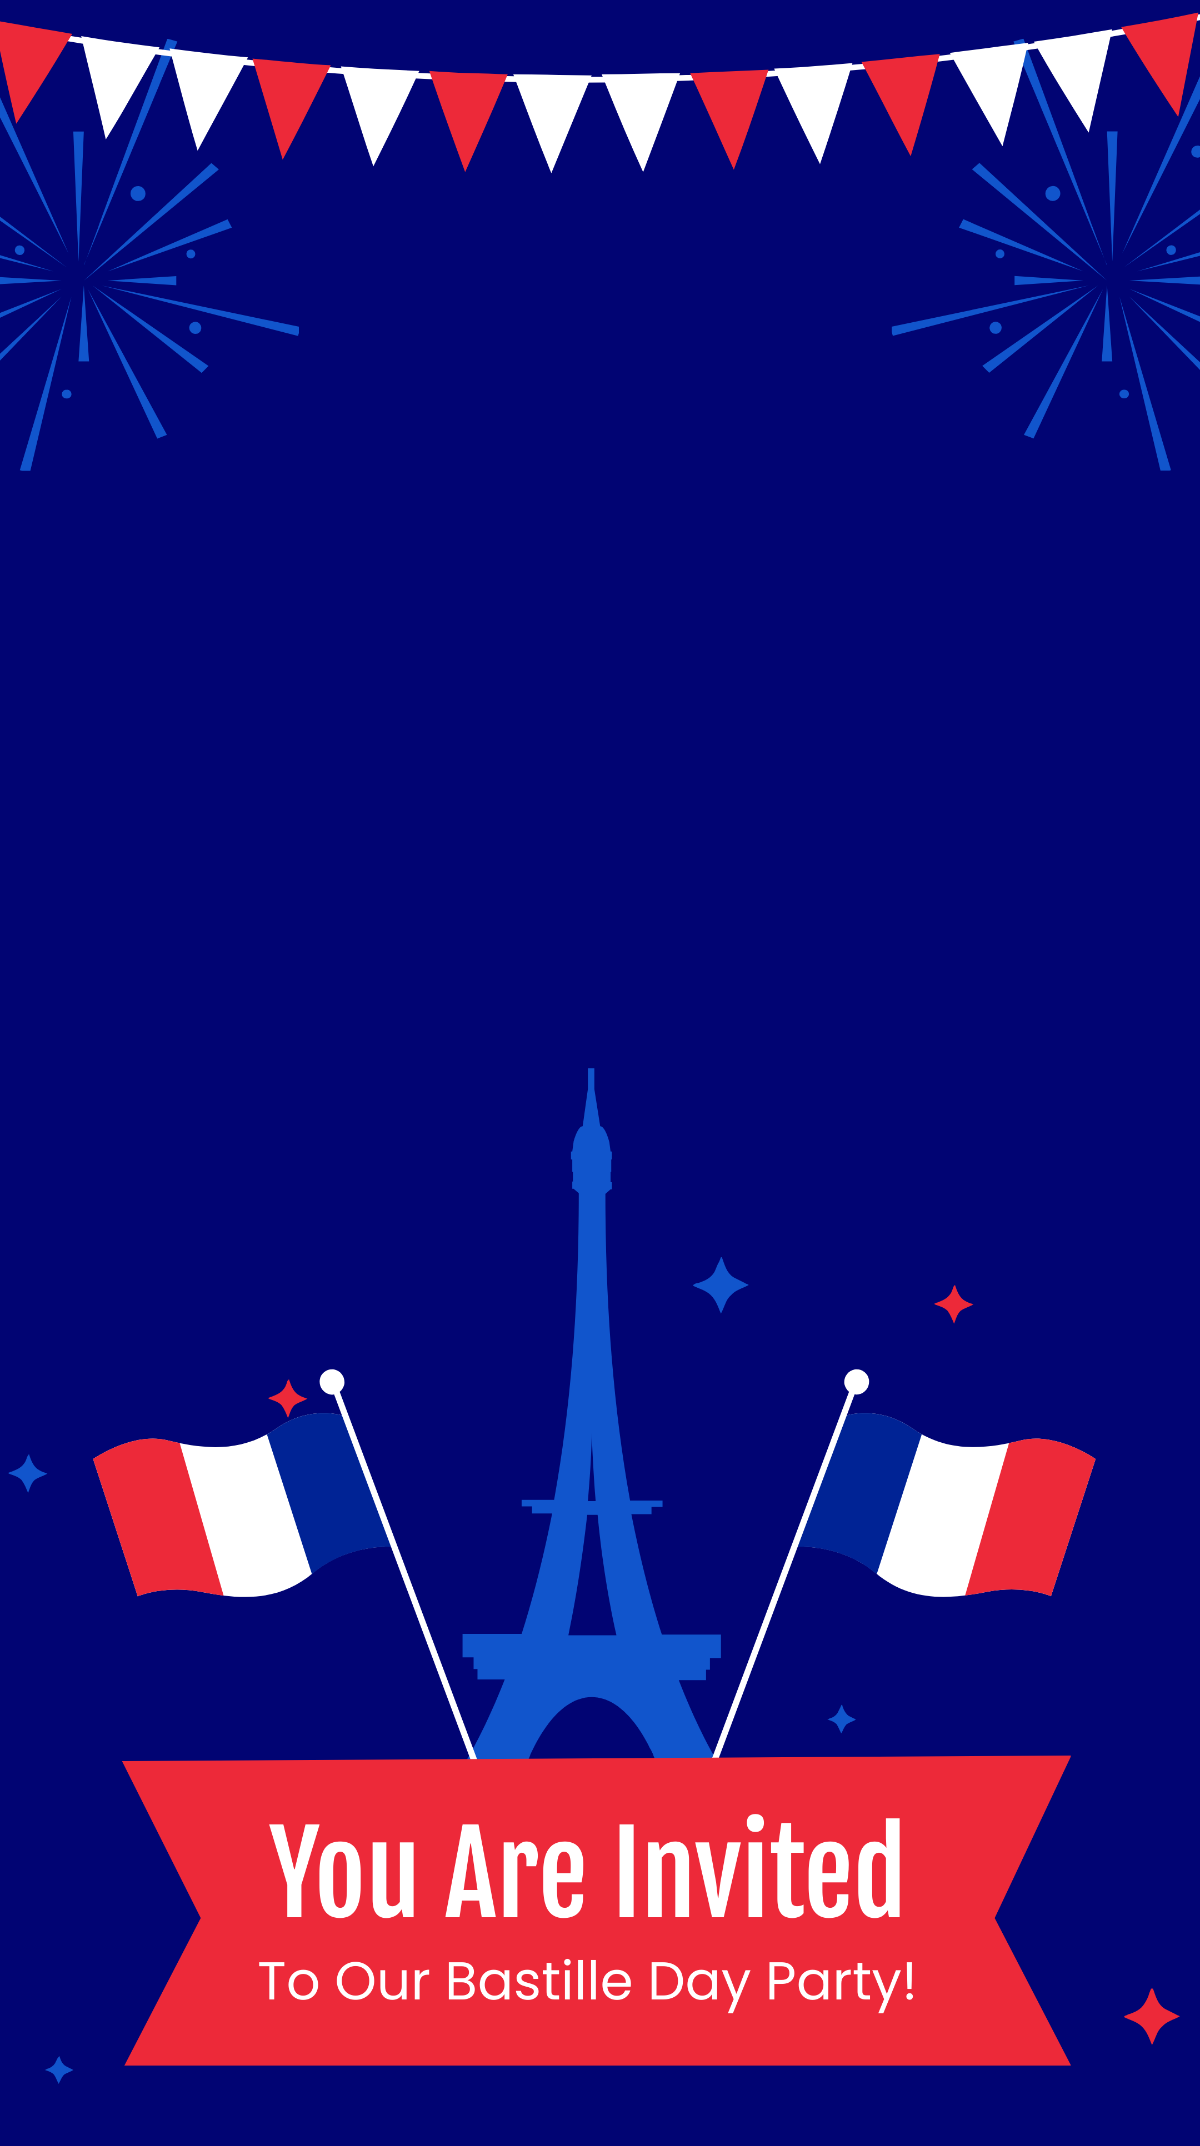 Bastille Day Party Snapchat Geofilter